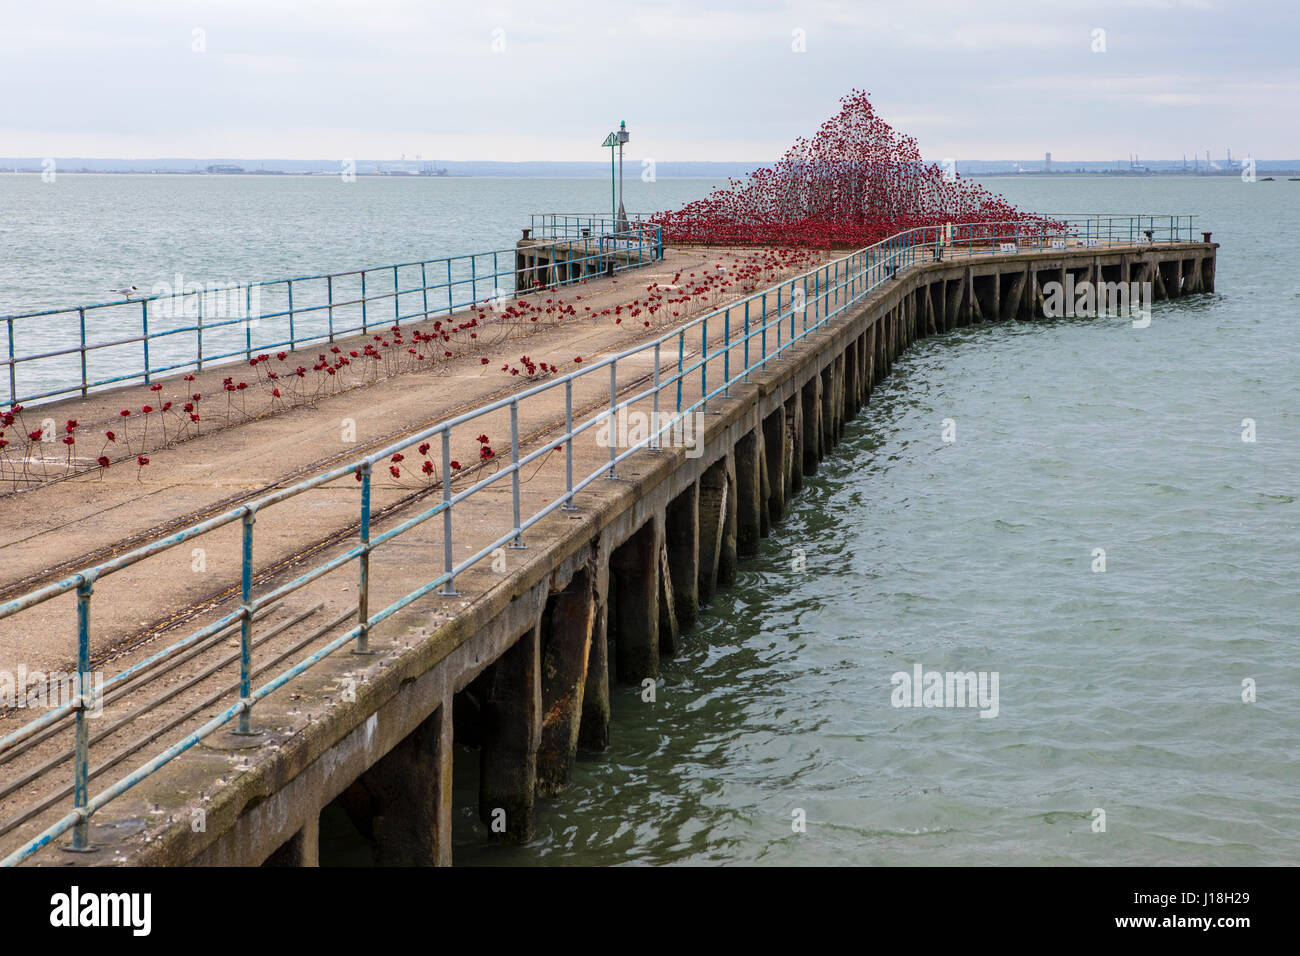 SOUTHEND-ON-SEA, UK - APRIL 16TH 2017:  The Poppy Wave installation by Paul Cummins and Tom Piper on Barge Pier in Shoeburyness, Southend-On-Sea, on 1 Stock Photo